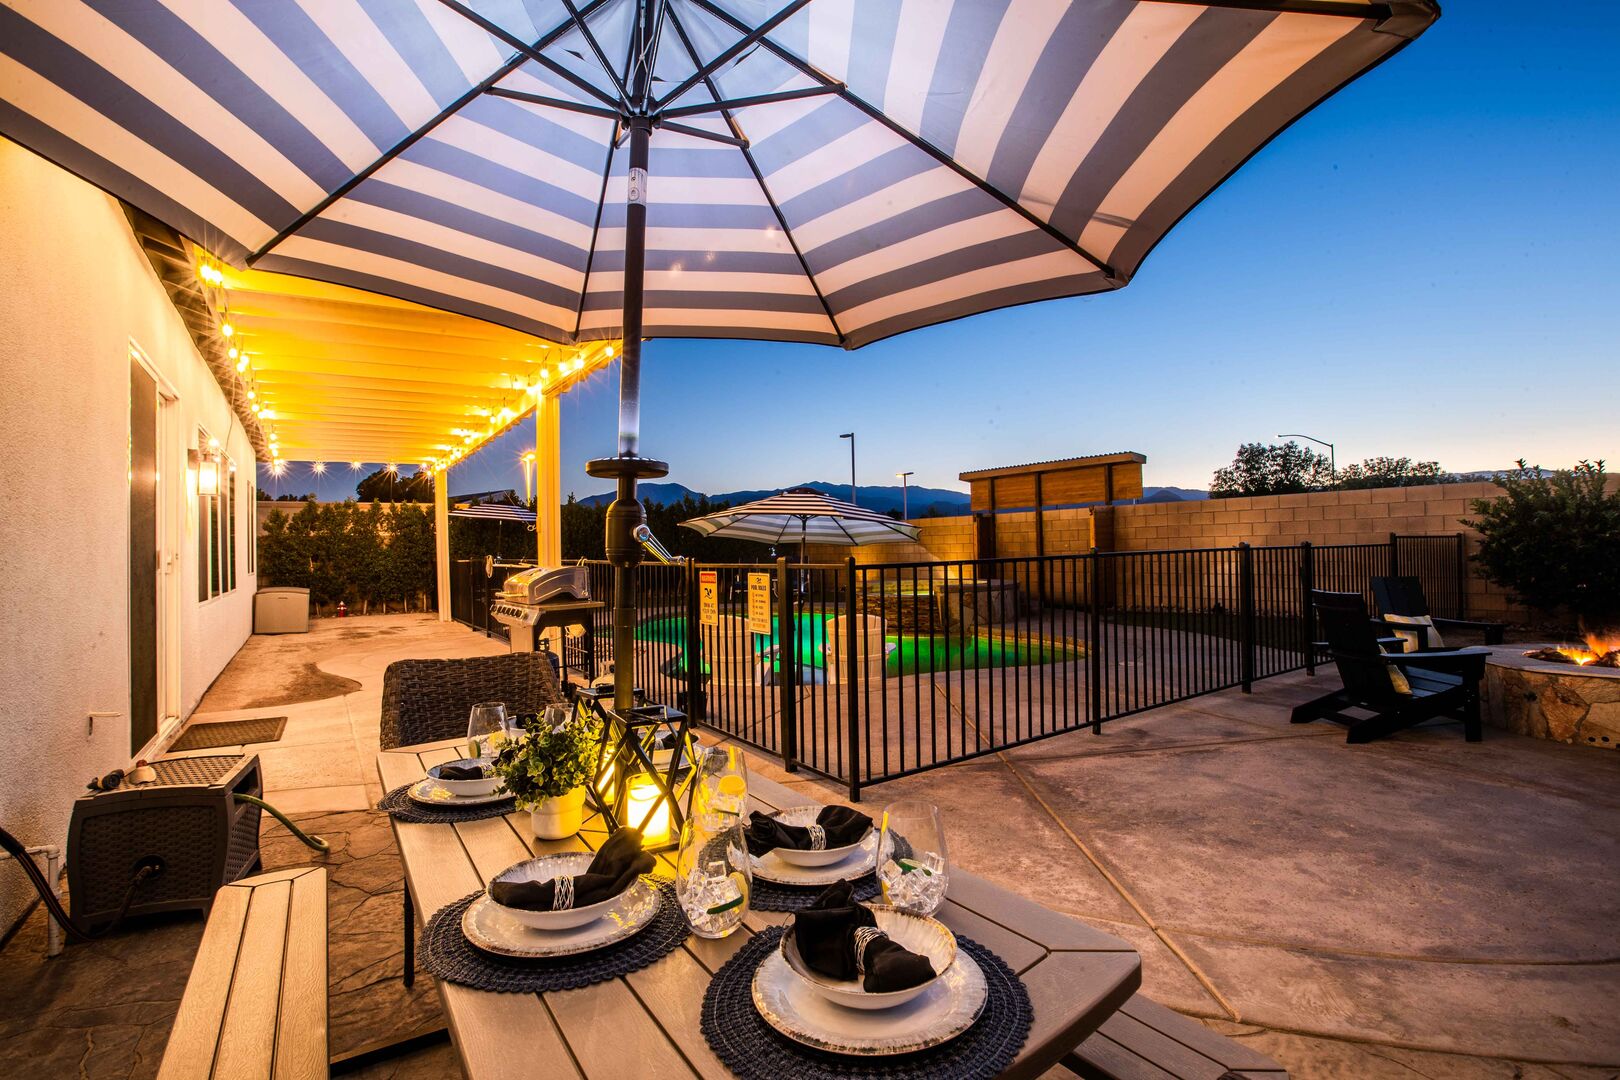 Savor delightful meals at the outdoor dining table, perfect for eight guests. Whether it's a sunny lunch or an enchanting evening dinner, you can use the umbrella for shade during the day and enjoy well-lit evening meals with a stunning view of the pool and sunset.